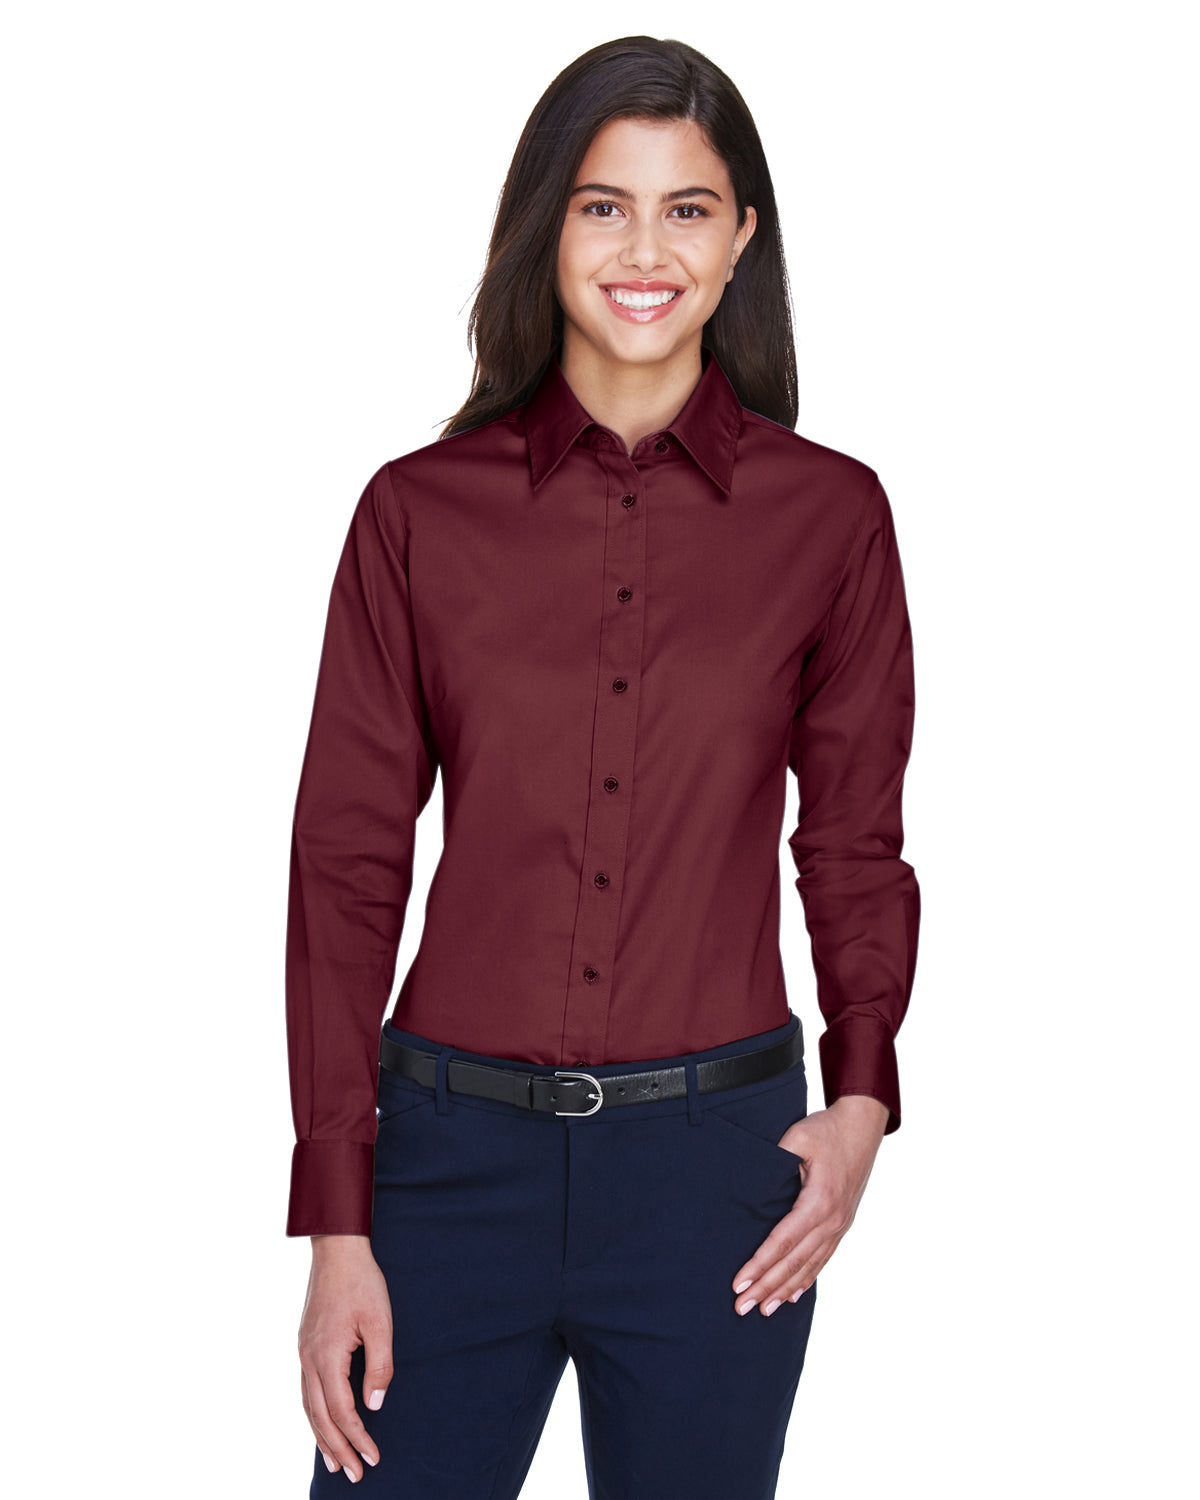 Ladies' Easy Blend Long Sleeve Twill Shirt with Stain Release